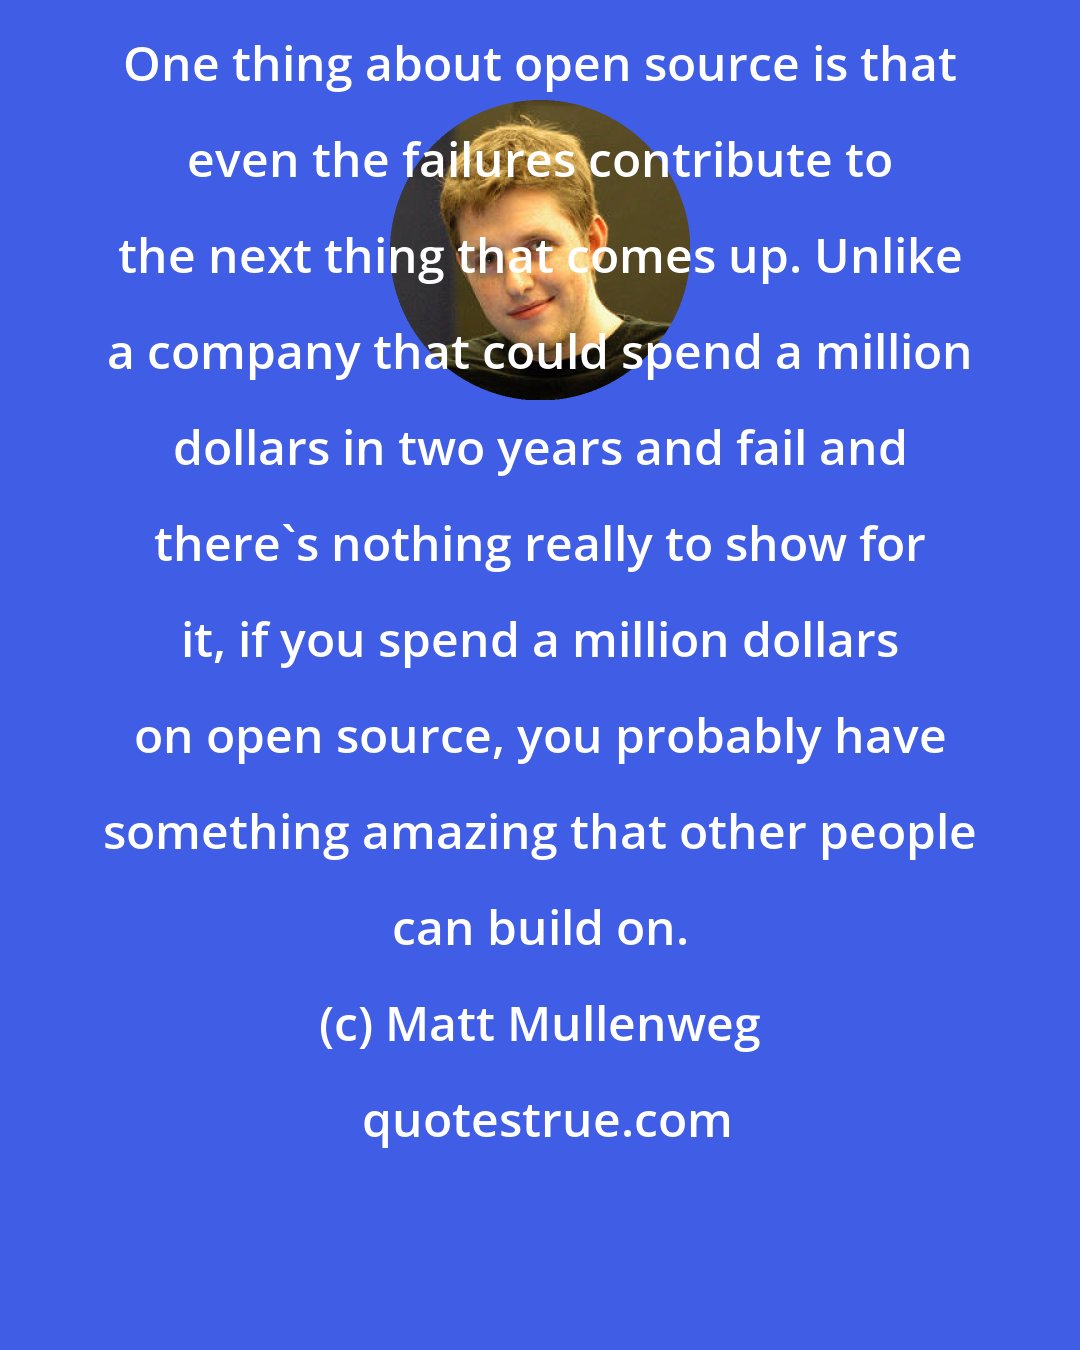 Matt Mullenweg: One thing about open source is that even the failures contribute to the next thing that comes up. Unlike a company that could spend a million dollars in two years and fail and there's nothing really to show for it, if you spend a million dollars on open source, you probably have something amazing that other people can build on.